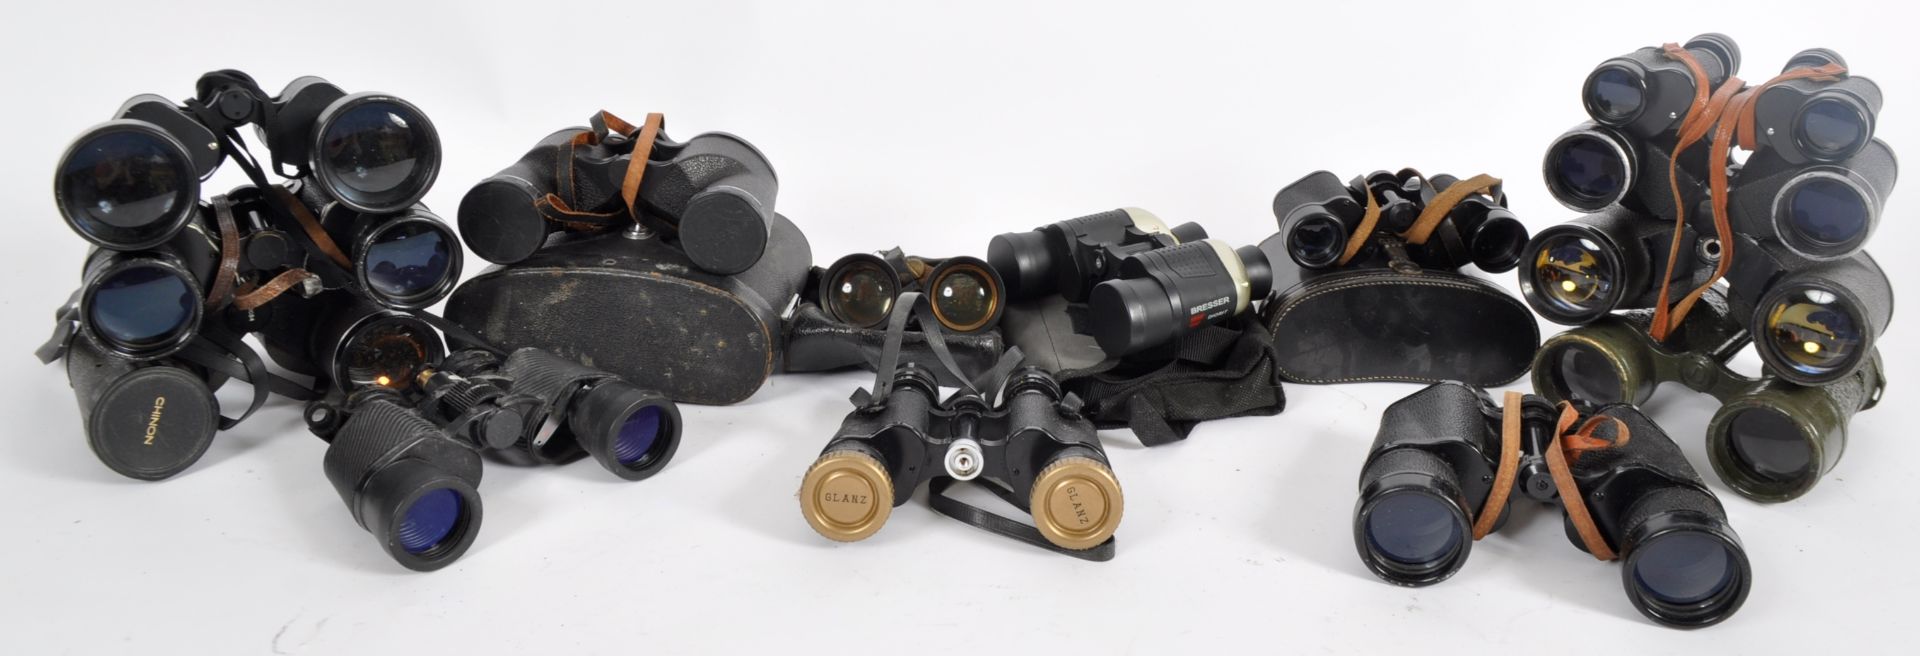 MIXED COLLECTION OF VINTAGE BINOCULARS - Image 2 of 6